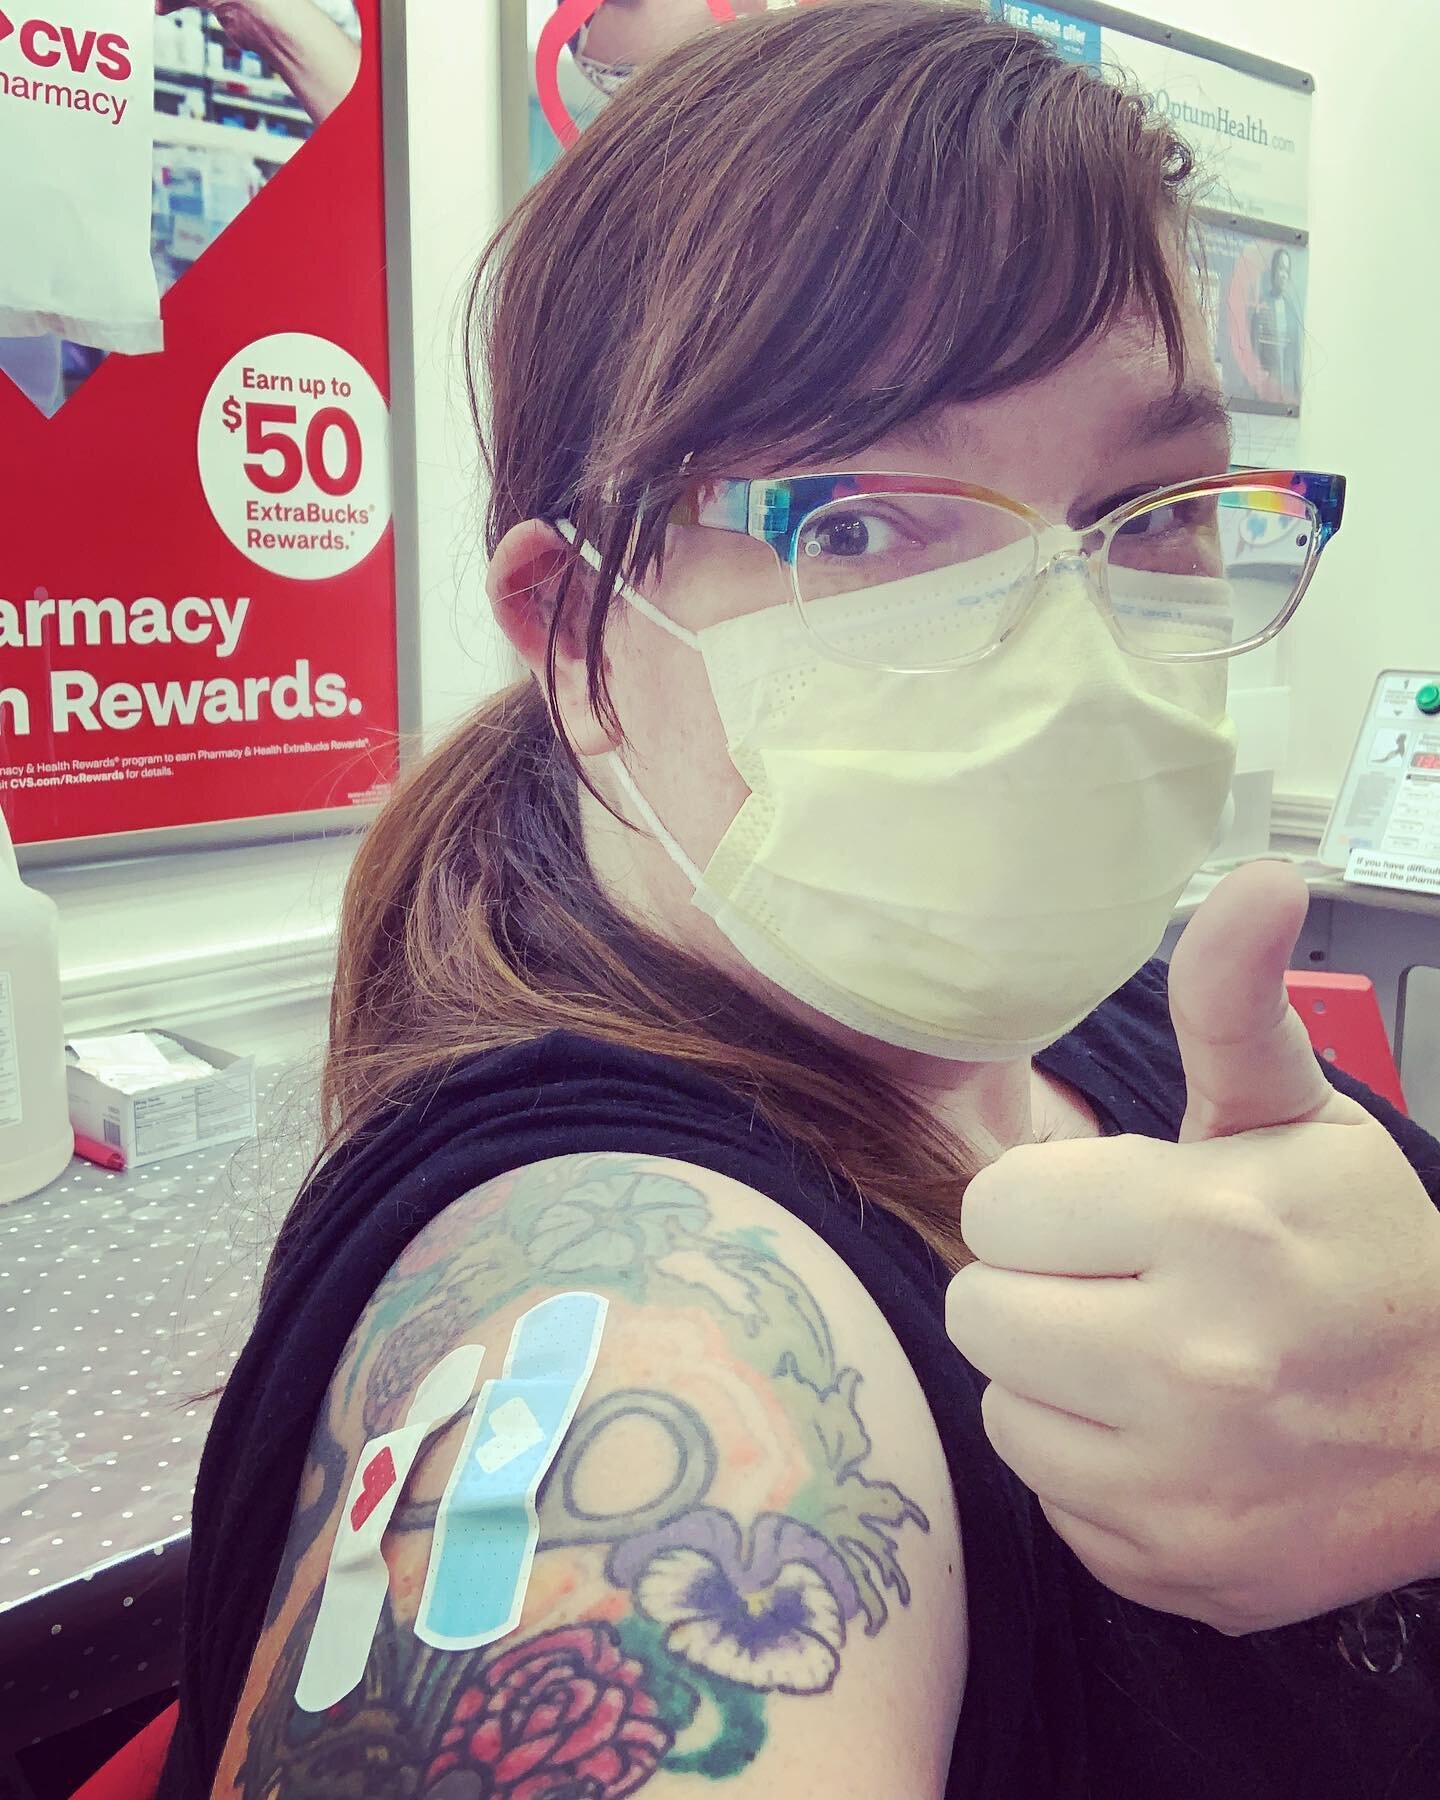 The new #covid booster (@cvspharmacy has it!), flu and TDAP all at once. I better get super powers after this ;)
.
.
.
#gettheshot #covidisntover #believescience #vaccineswork #artistslife